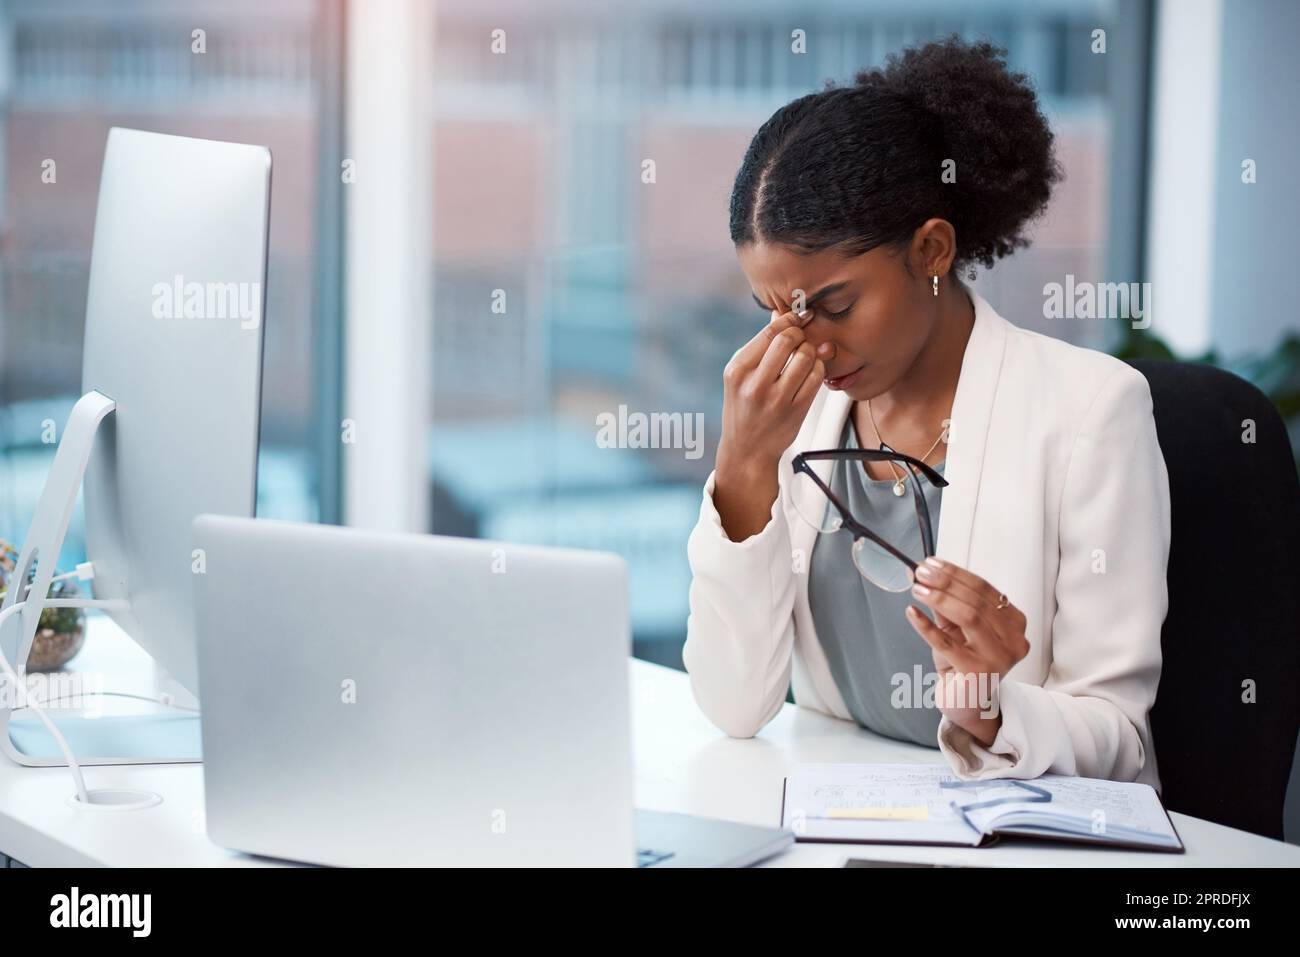 Stressed, tired and frustrated businesswoman with headache, eye strain and burnout making mistake on office laptop. Overworked creative entrepreneur failing to meet deadline or plan startup strategy Stock Photo